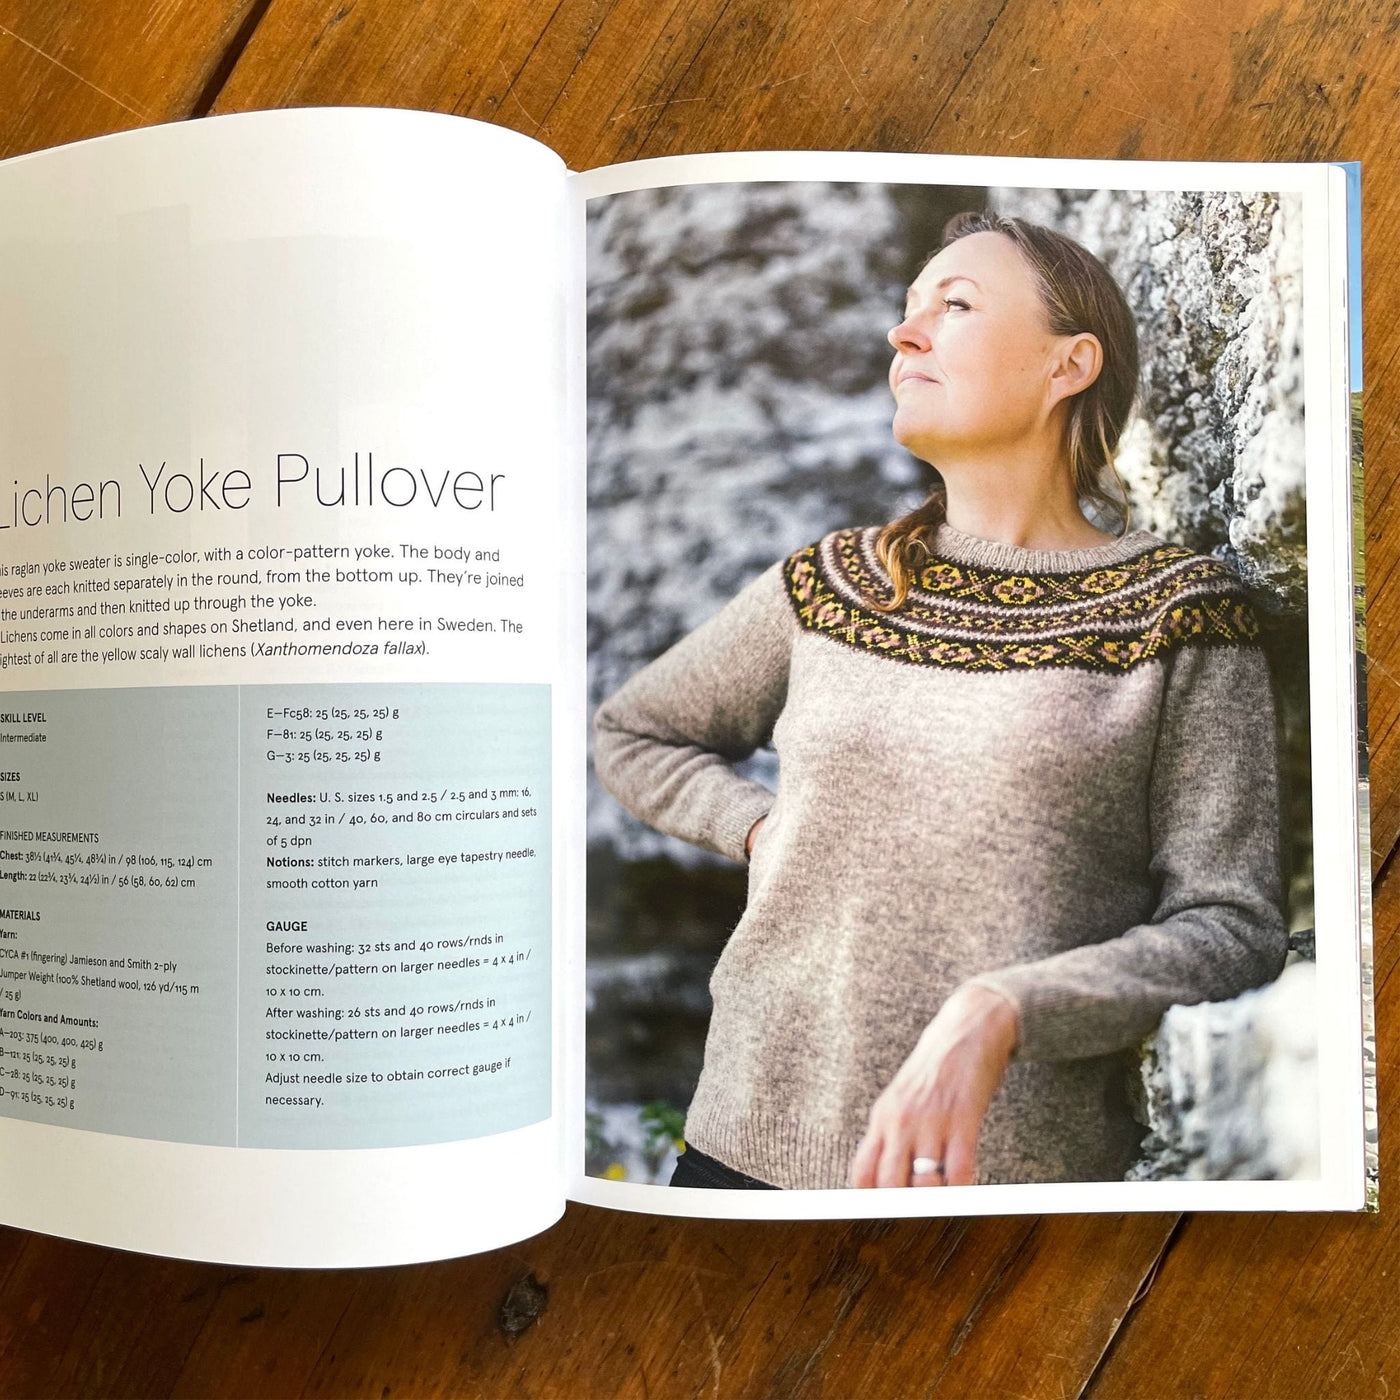 Lichen Yoke Pullover by Carina Olsson in 2ply Jumper – The Woolly